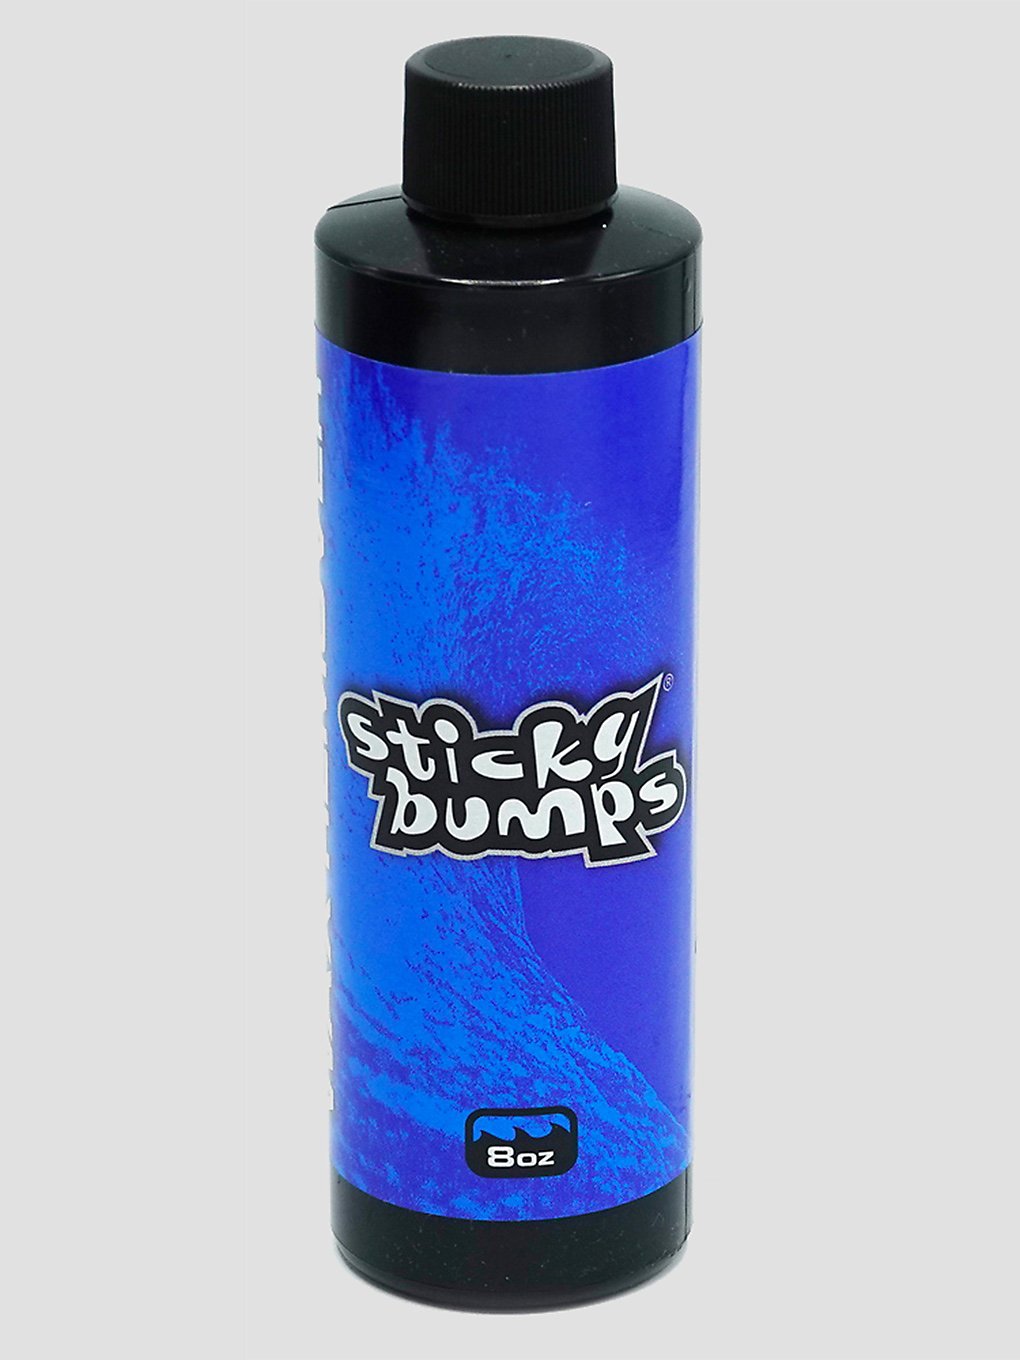 Sticky Bumps 8oz Bottle Surf wax Remover patroon